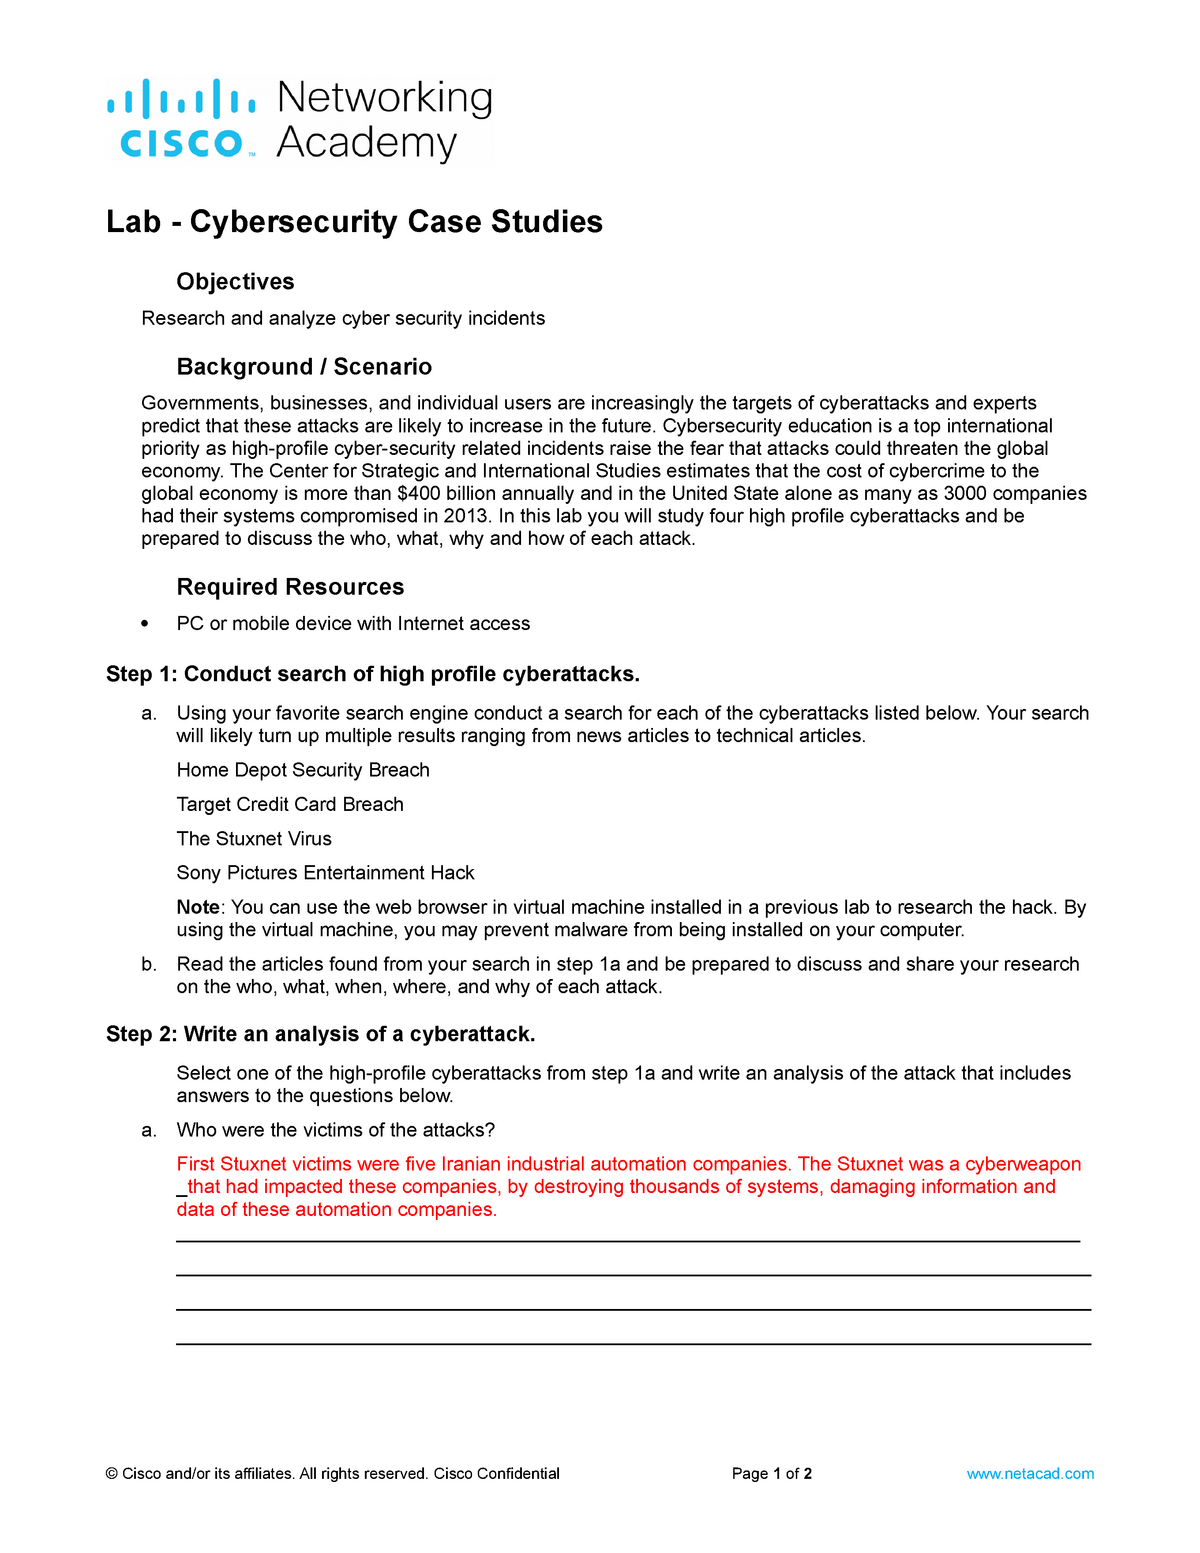 case study involving security